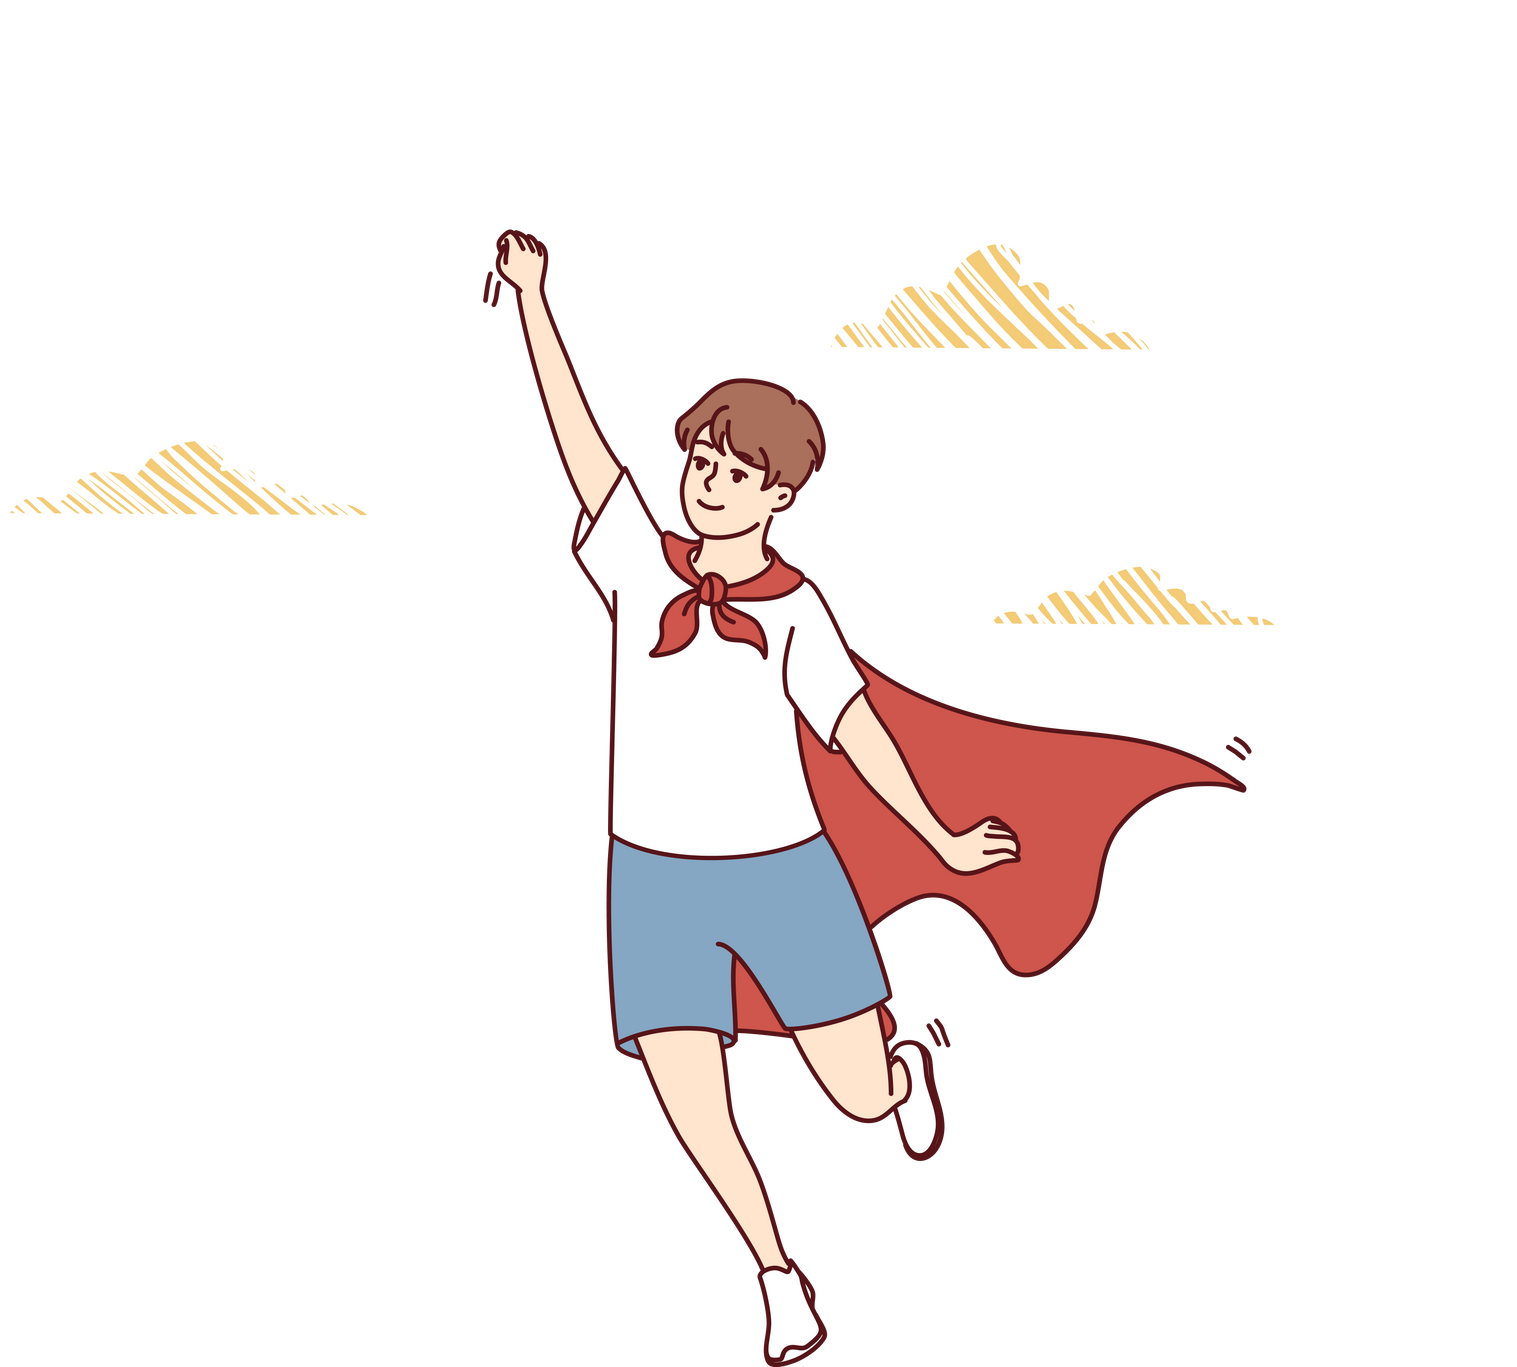 Teenager boy in superhero cape stretches hand up and represents flight to save people. Vector image